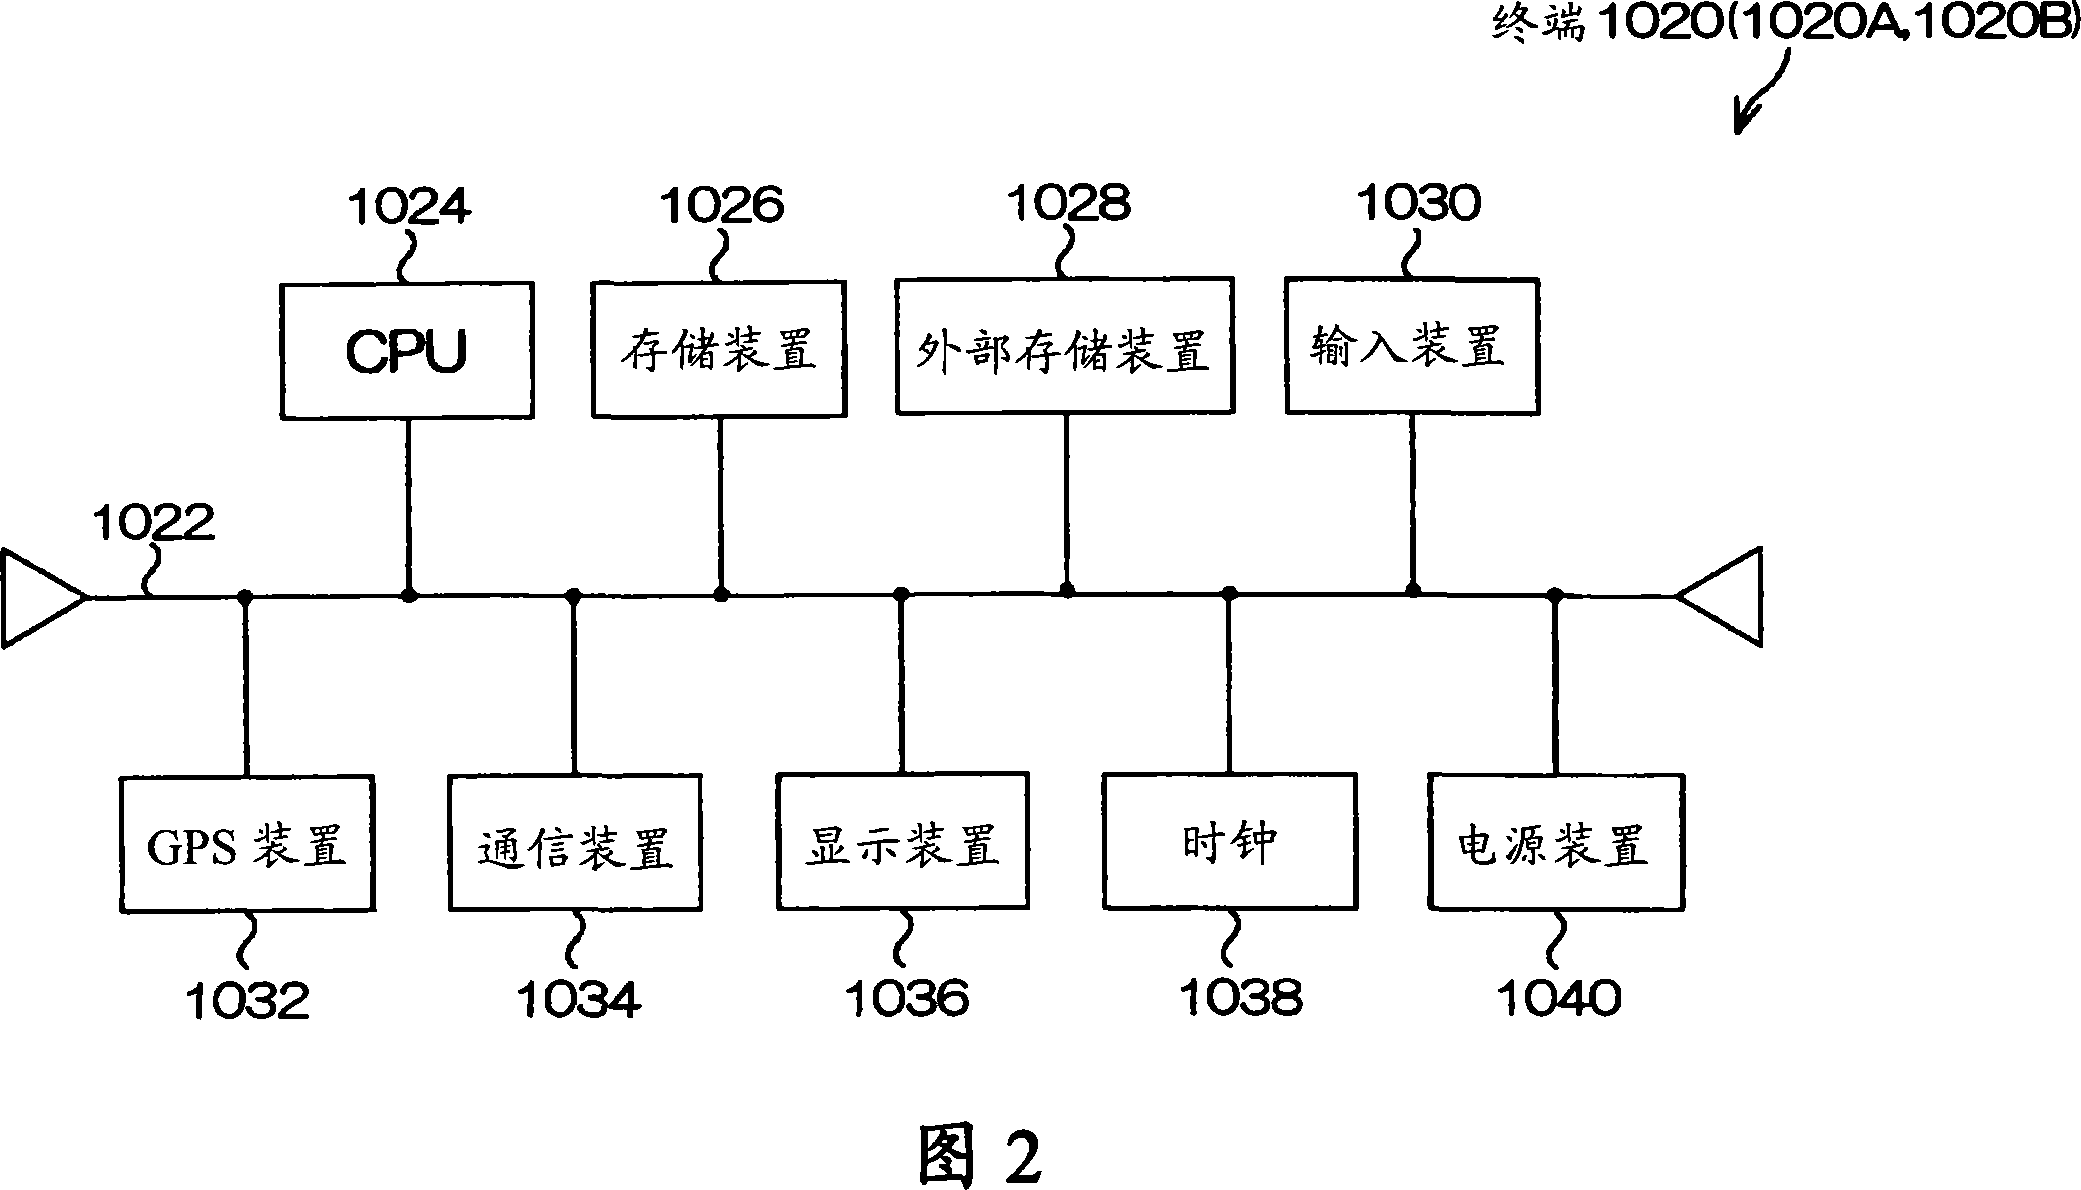 Positioning device, method of controlling positioning device